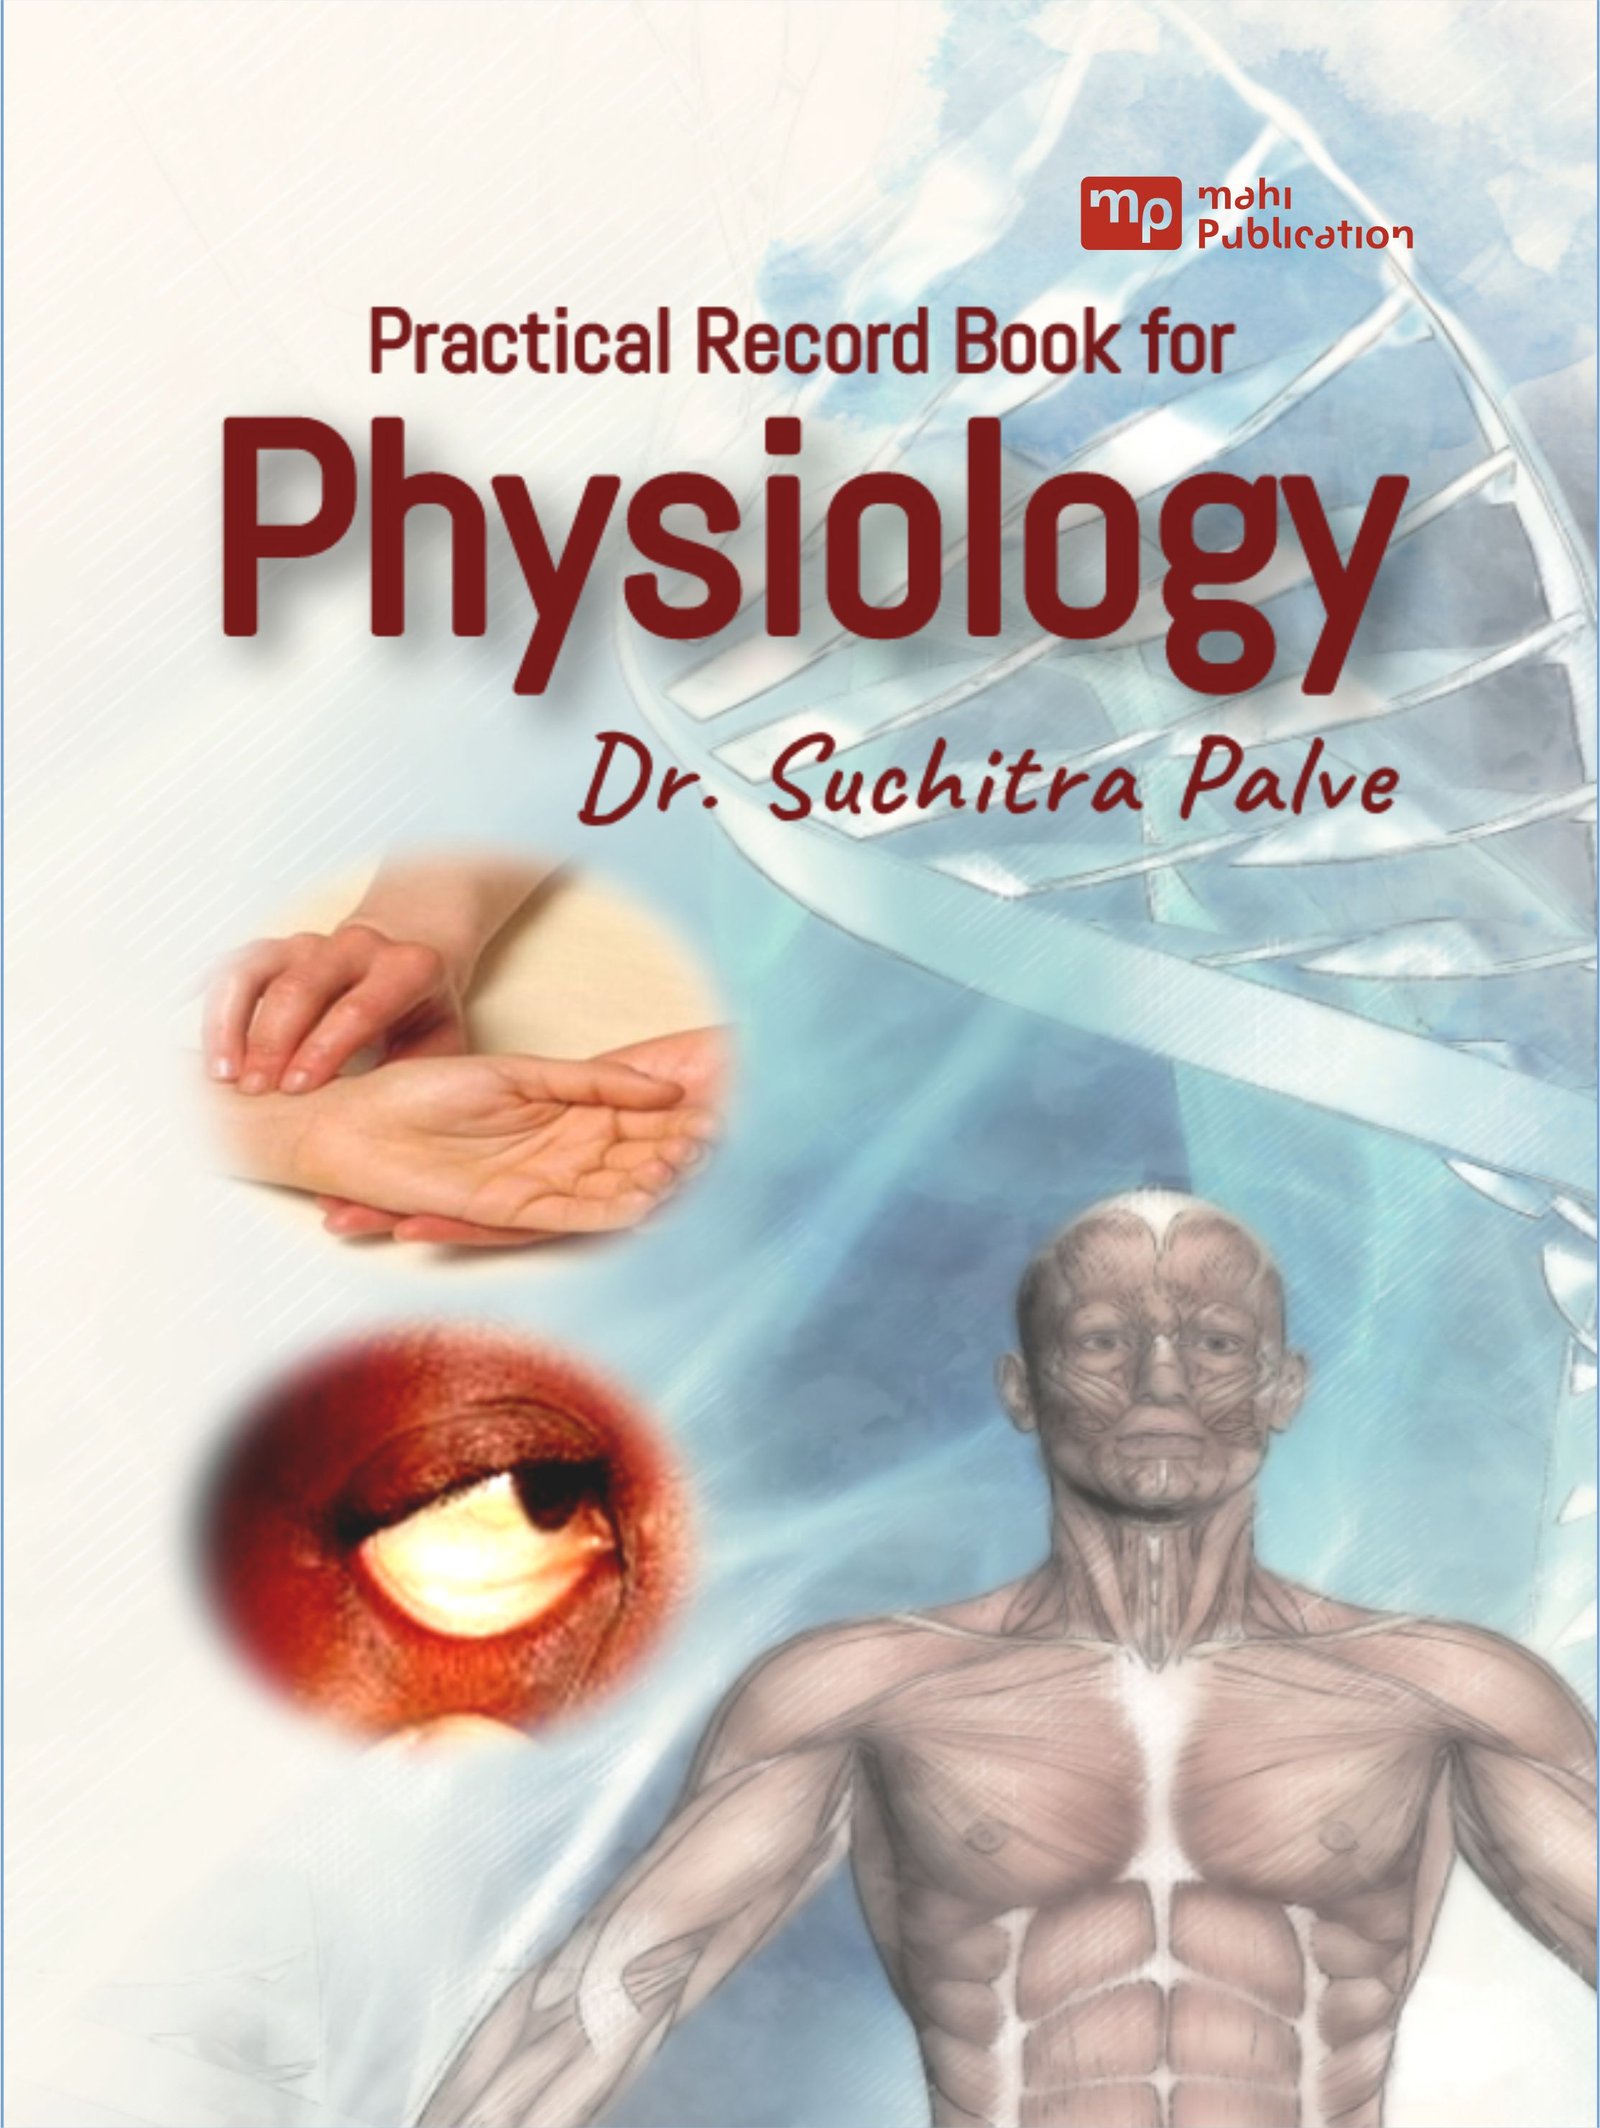 Practical Record Book for Physiology